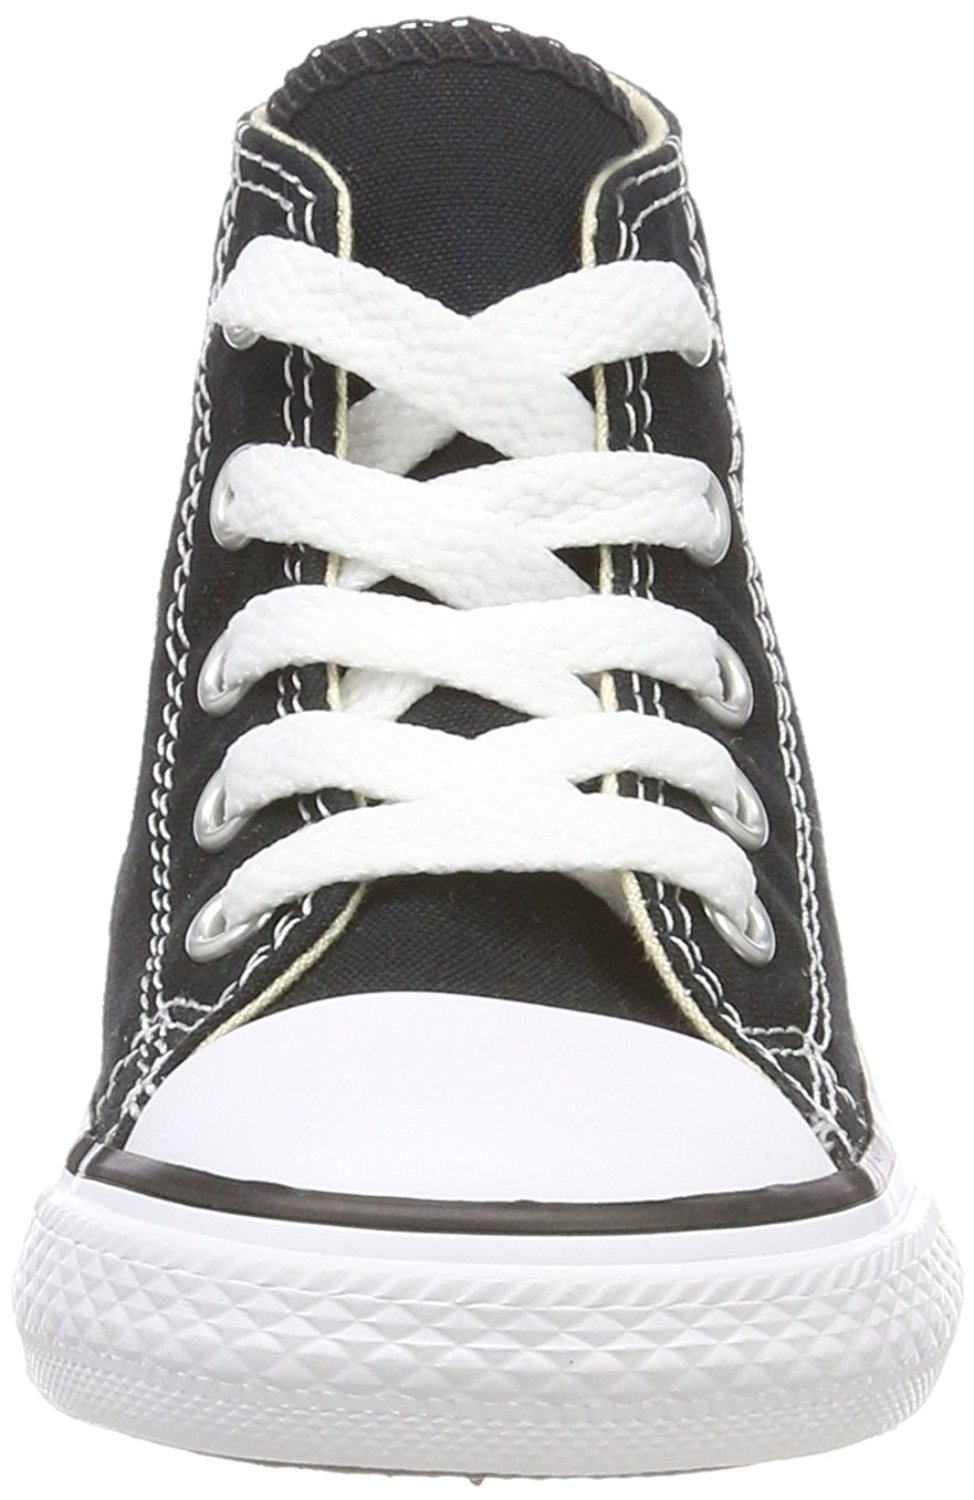 Kids Converse Girls Chuck Taylor All Star Canvas Hight Top Lace, Black ...